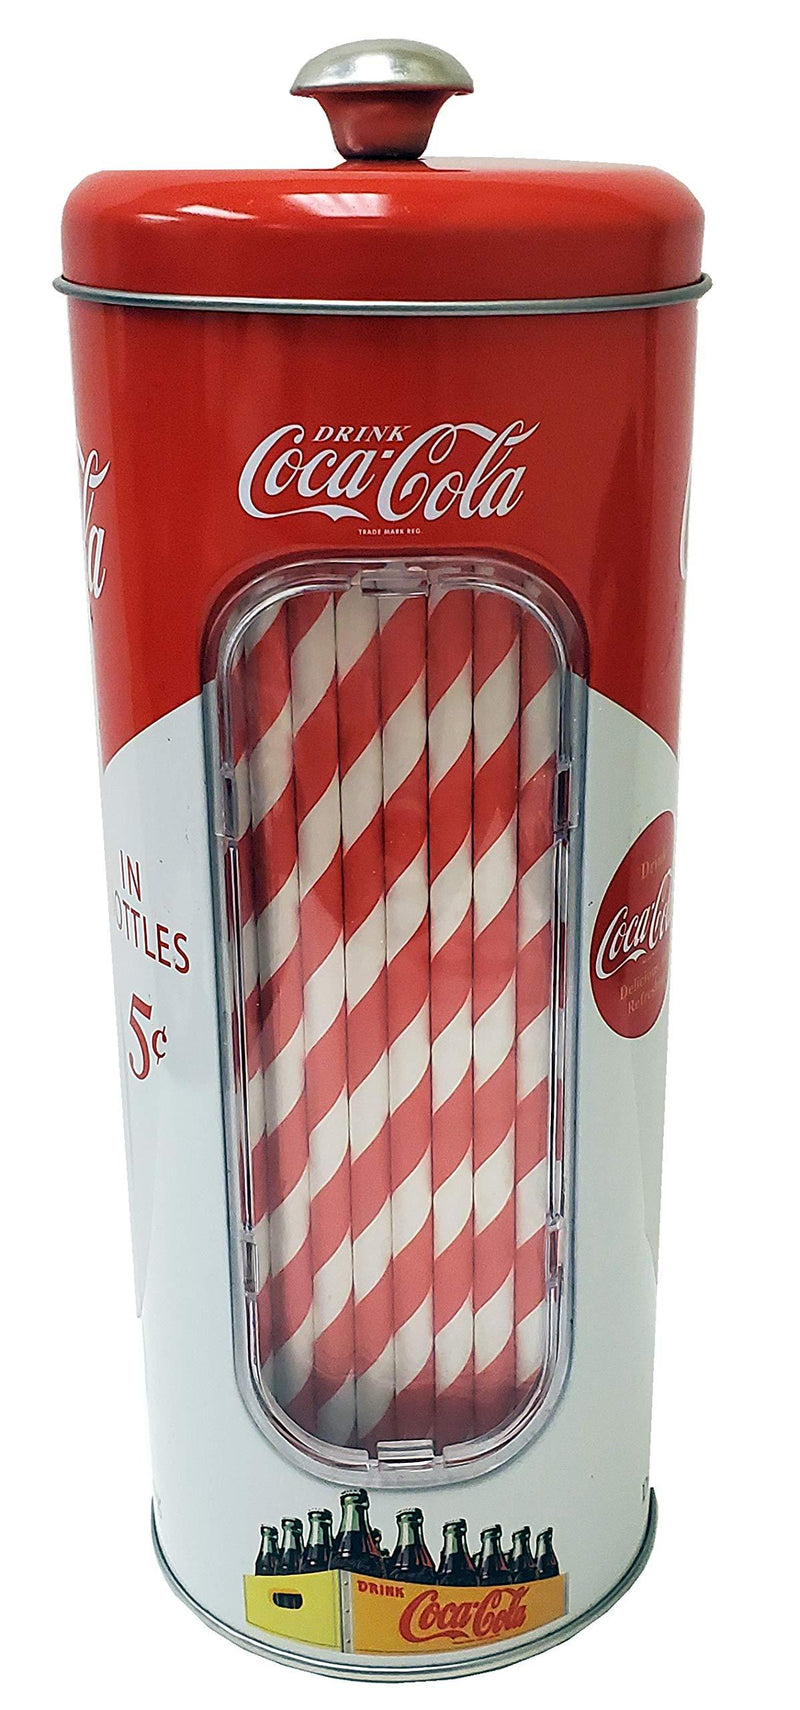  [AUSTRALIA] - The Tin Box Company Coke Holder Tin with 20 Paper Straws Inside, 3-3/8 x 8-1/4"H, Red and White